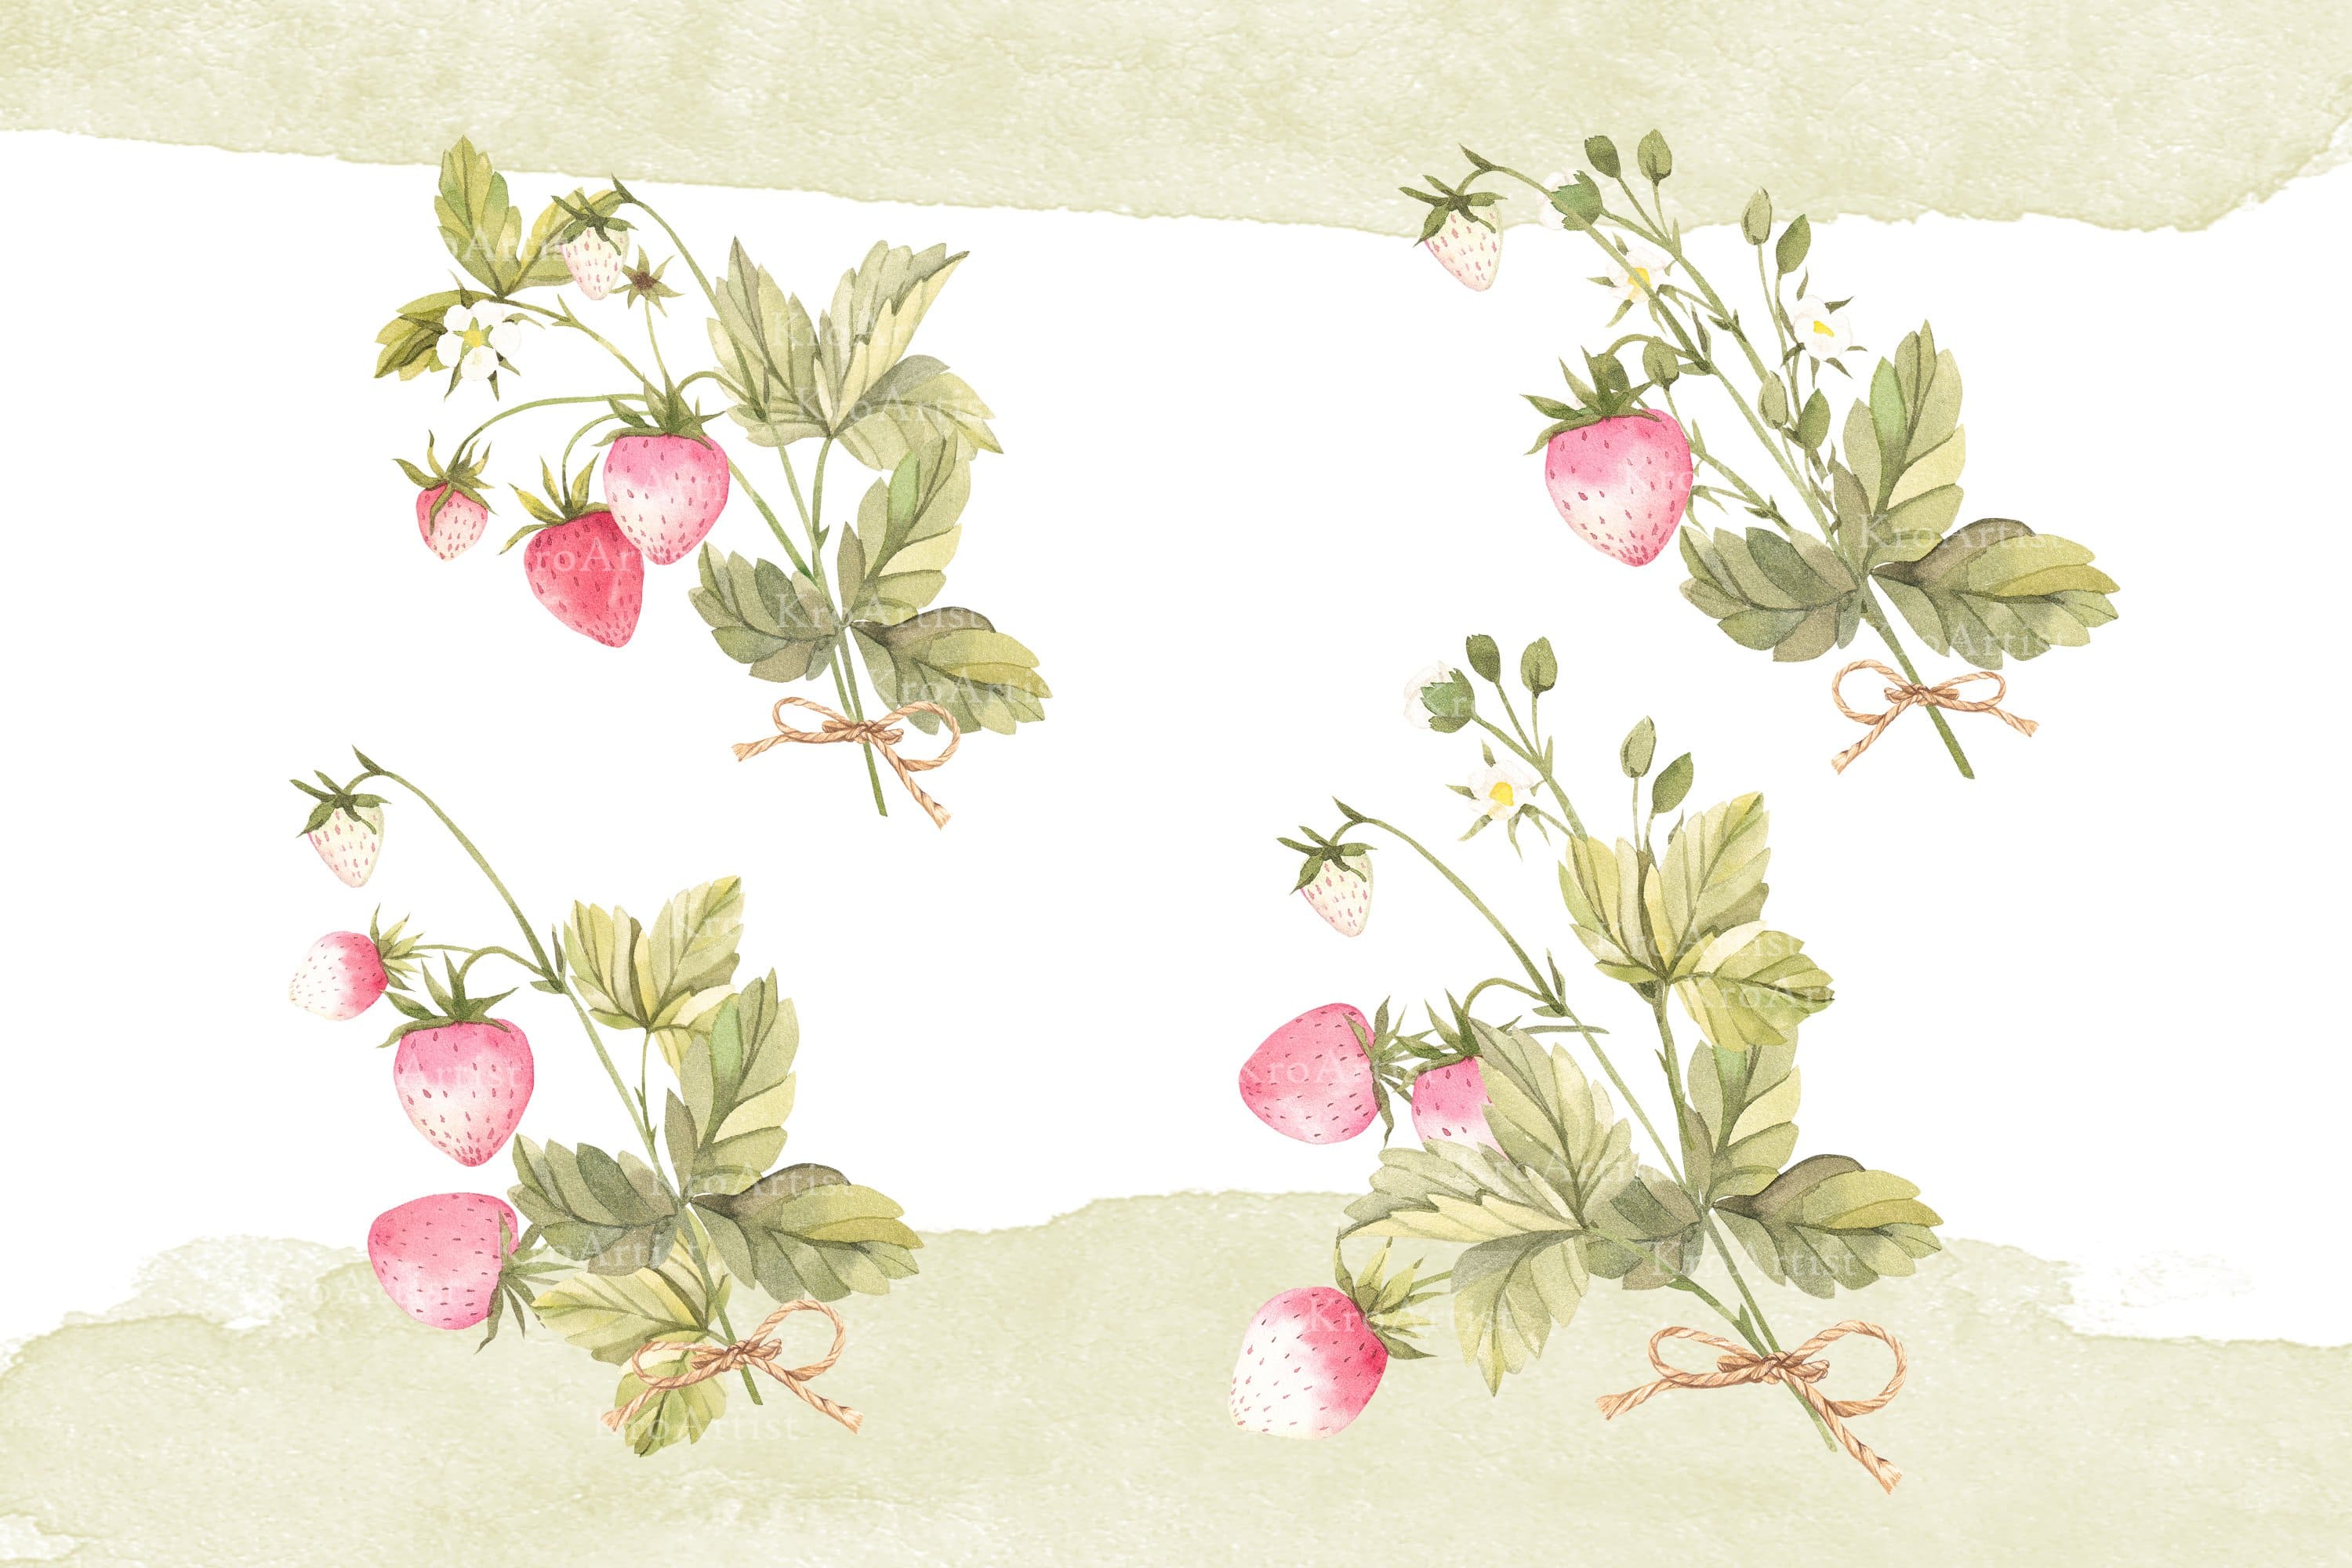 Illustration with four strawberry bushes on a white background.